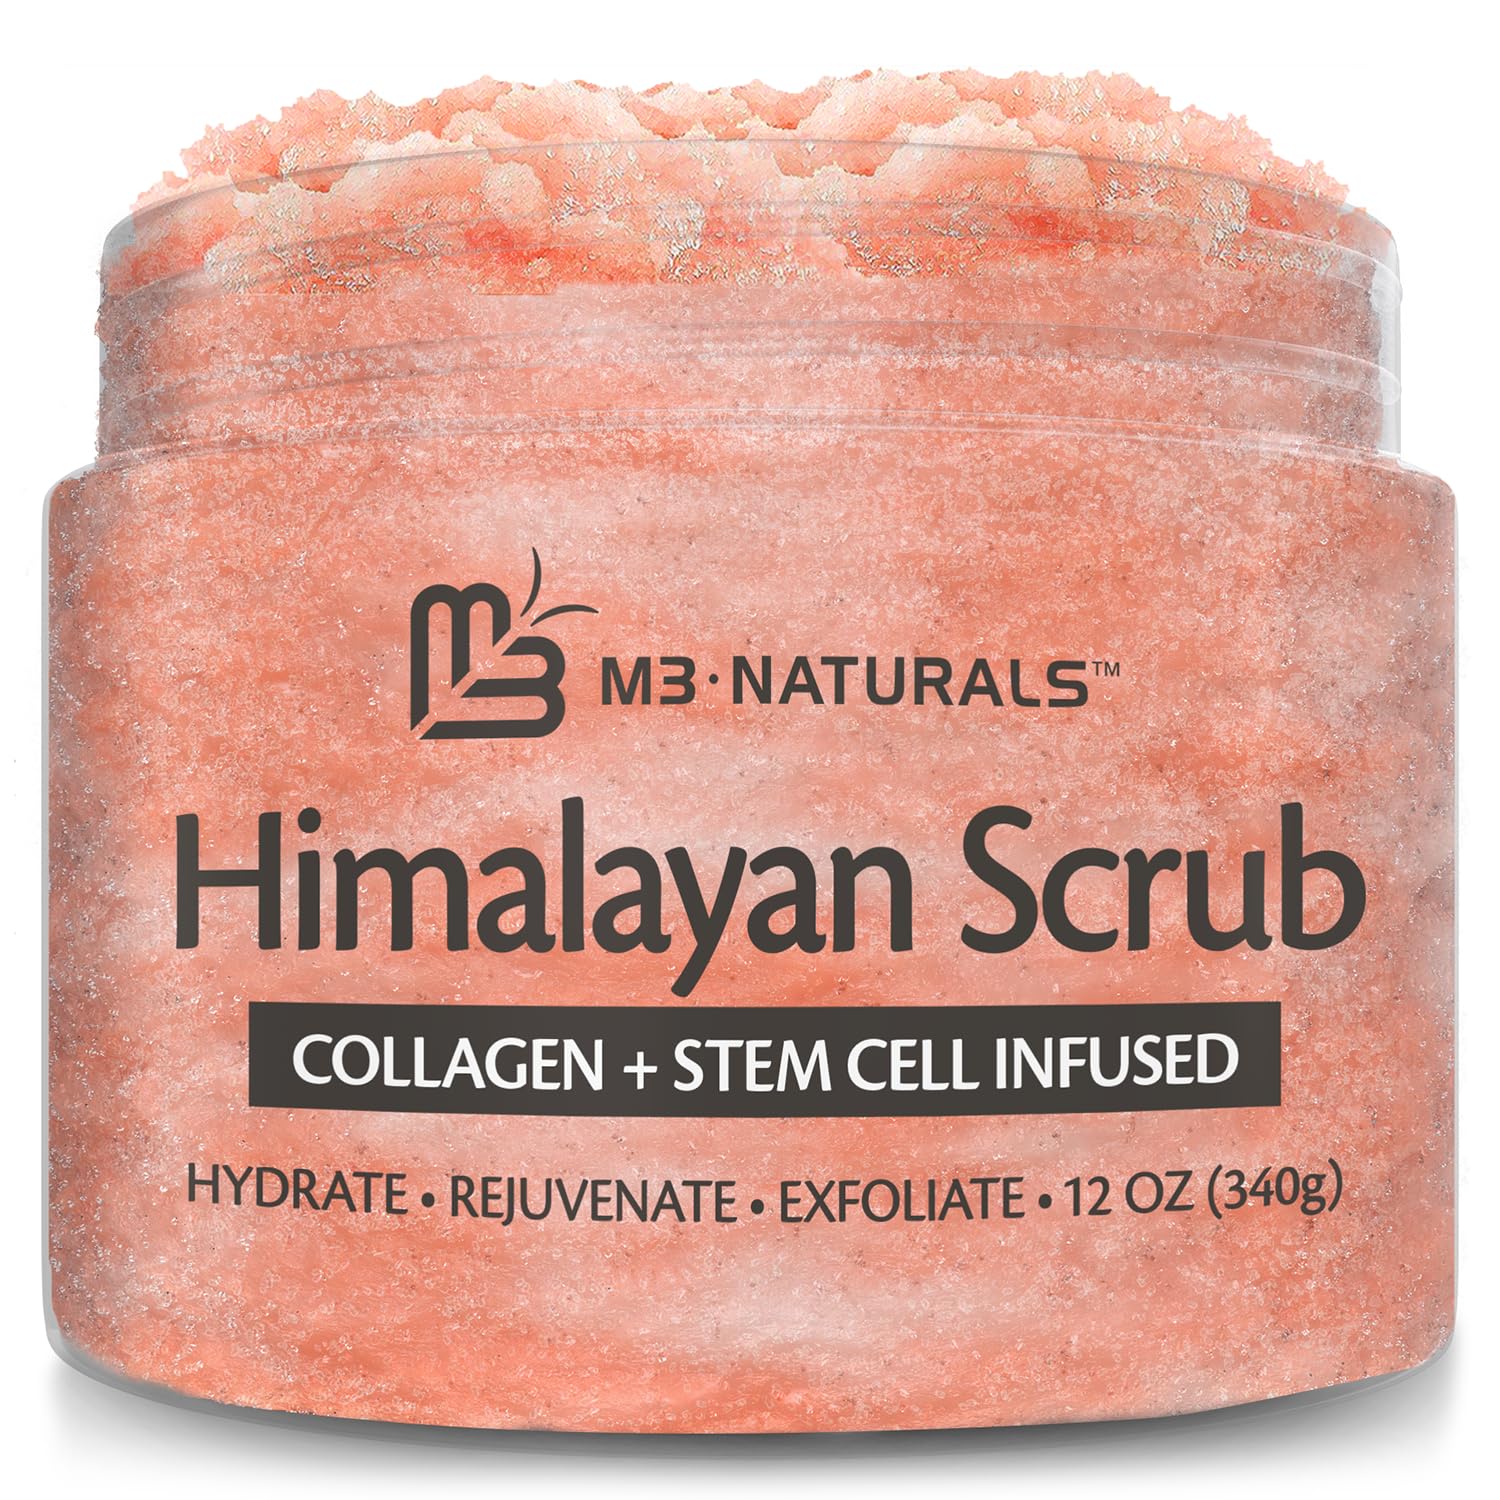 Himalayan Salt Scrub Face Foot  Body Exfoliator Infused with Collagen and Stem Cell Natural Exfoliating Salt Body Scrub for Toning Cellulite Skin Care by M3 Naturals